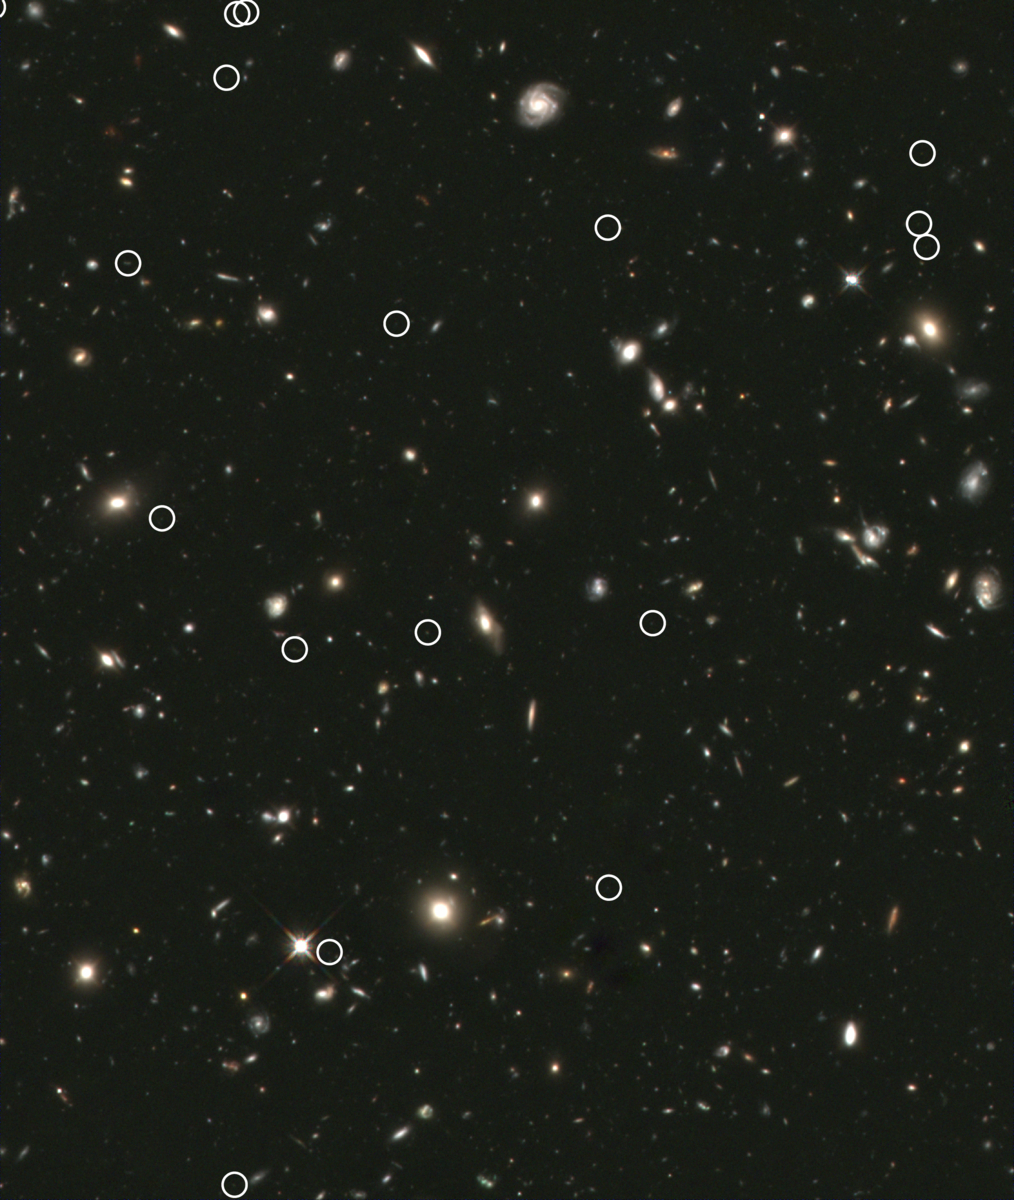 true color image of the central regions of the Hubble Ultra-Deep Field constructed from the most sensitive near-IR imaging ever obtained.